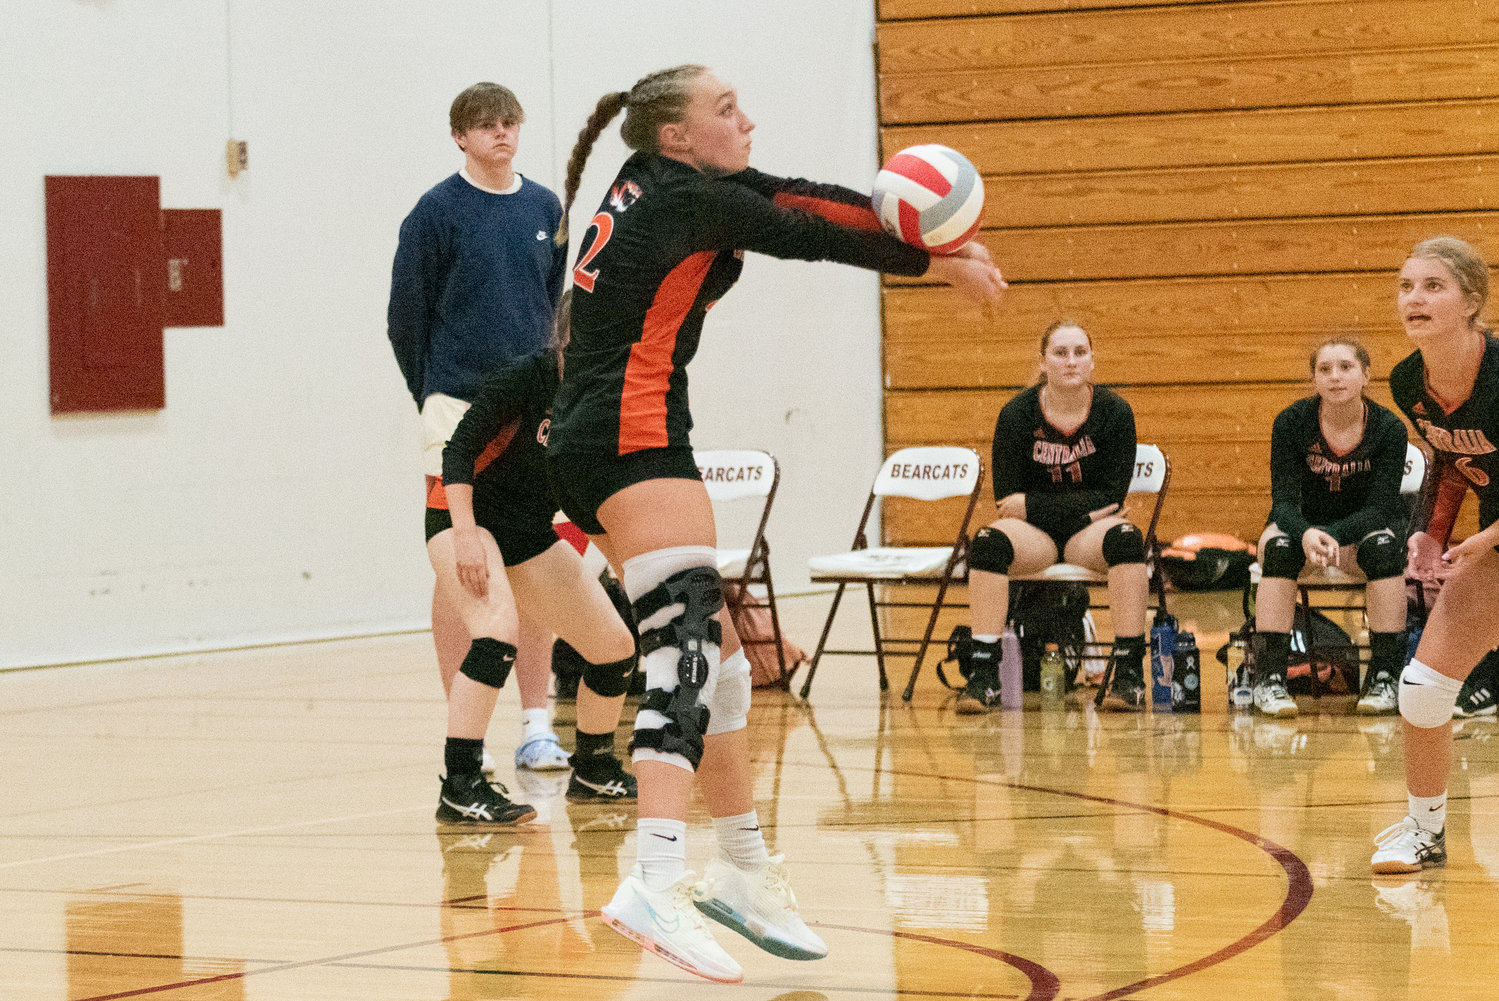 Centralia's Lauren Wasson digs the ball during the Tigers' Sept. 22 loss at W.F. West.